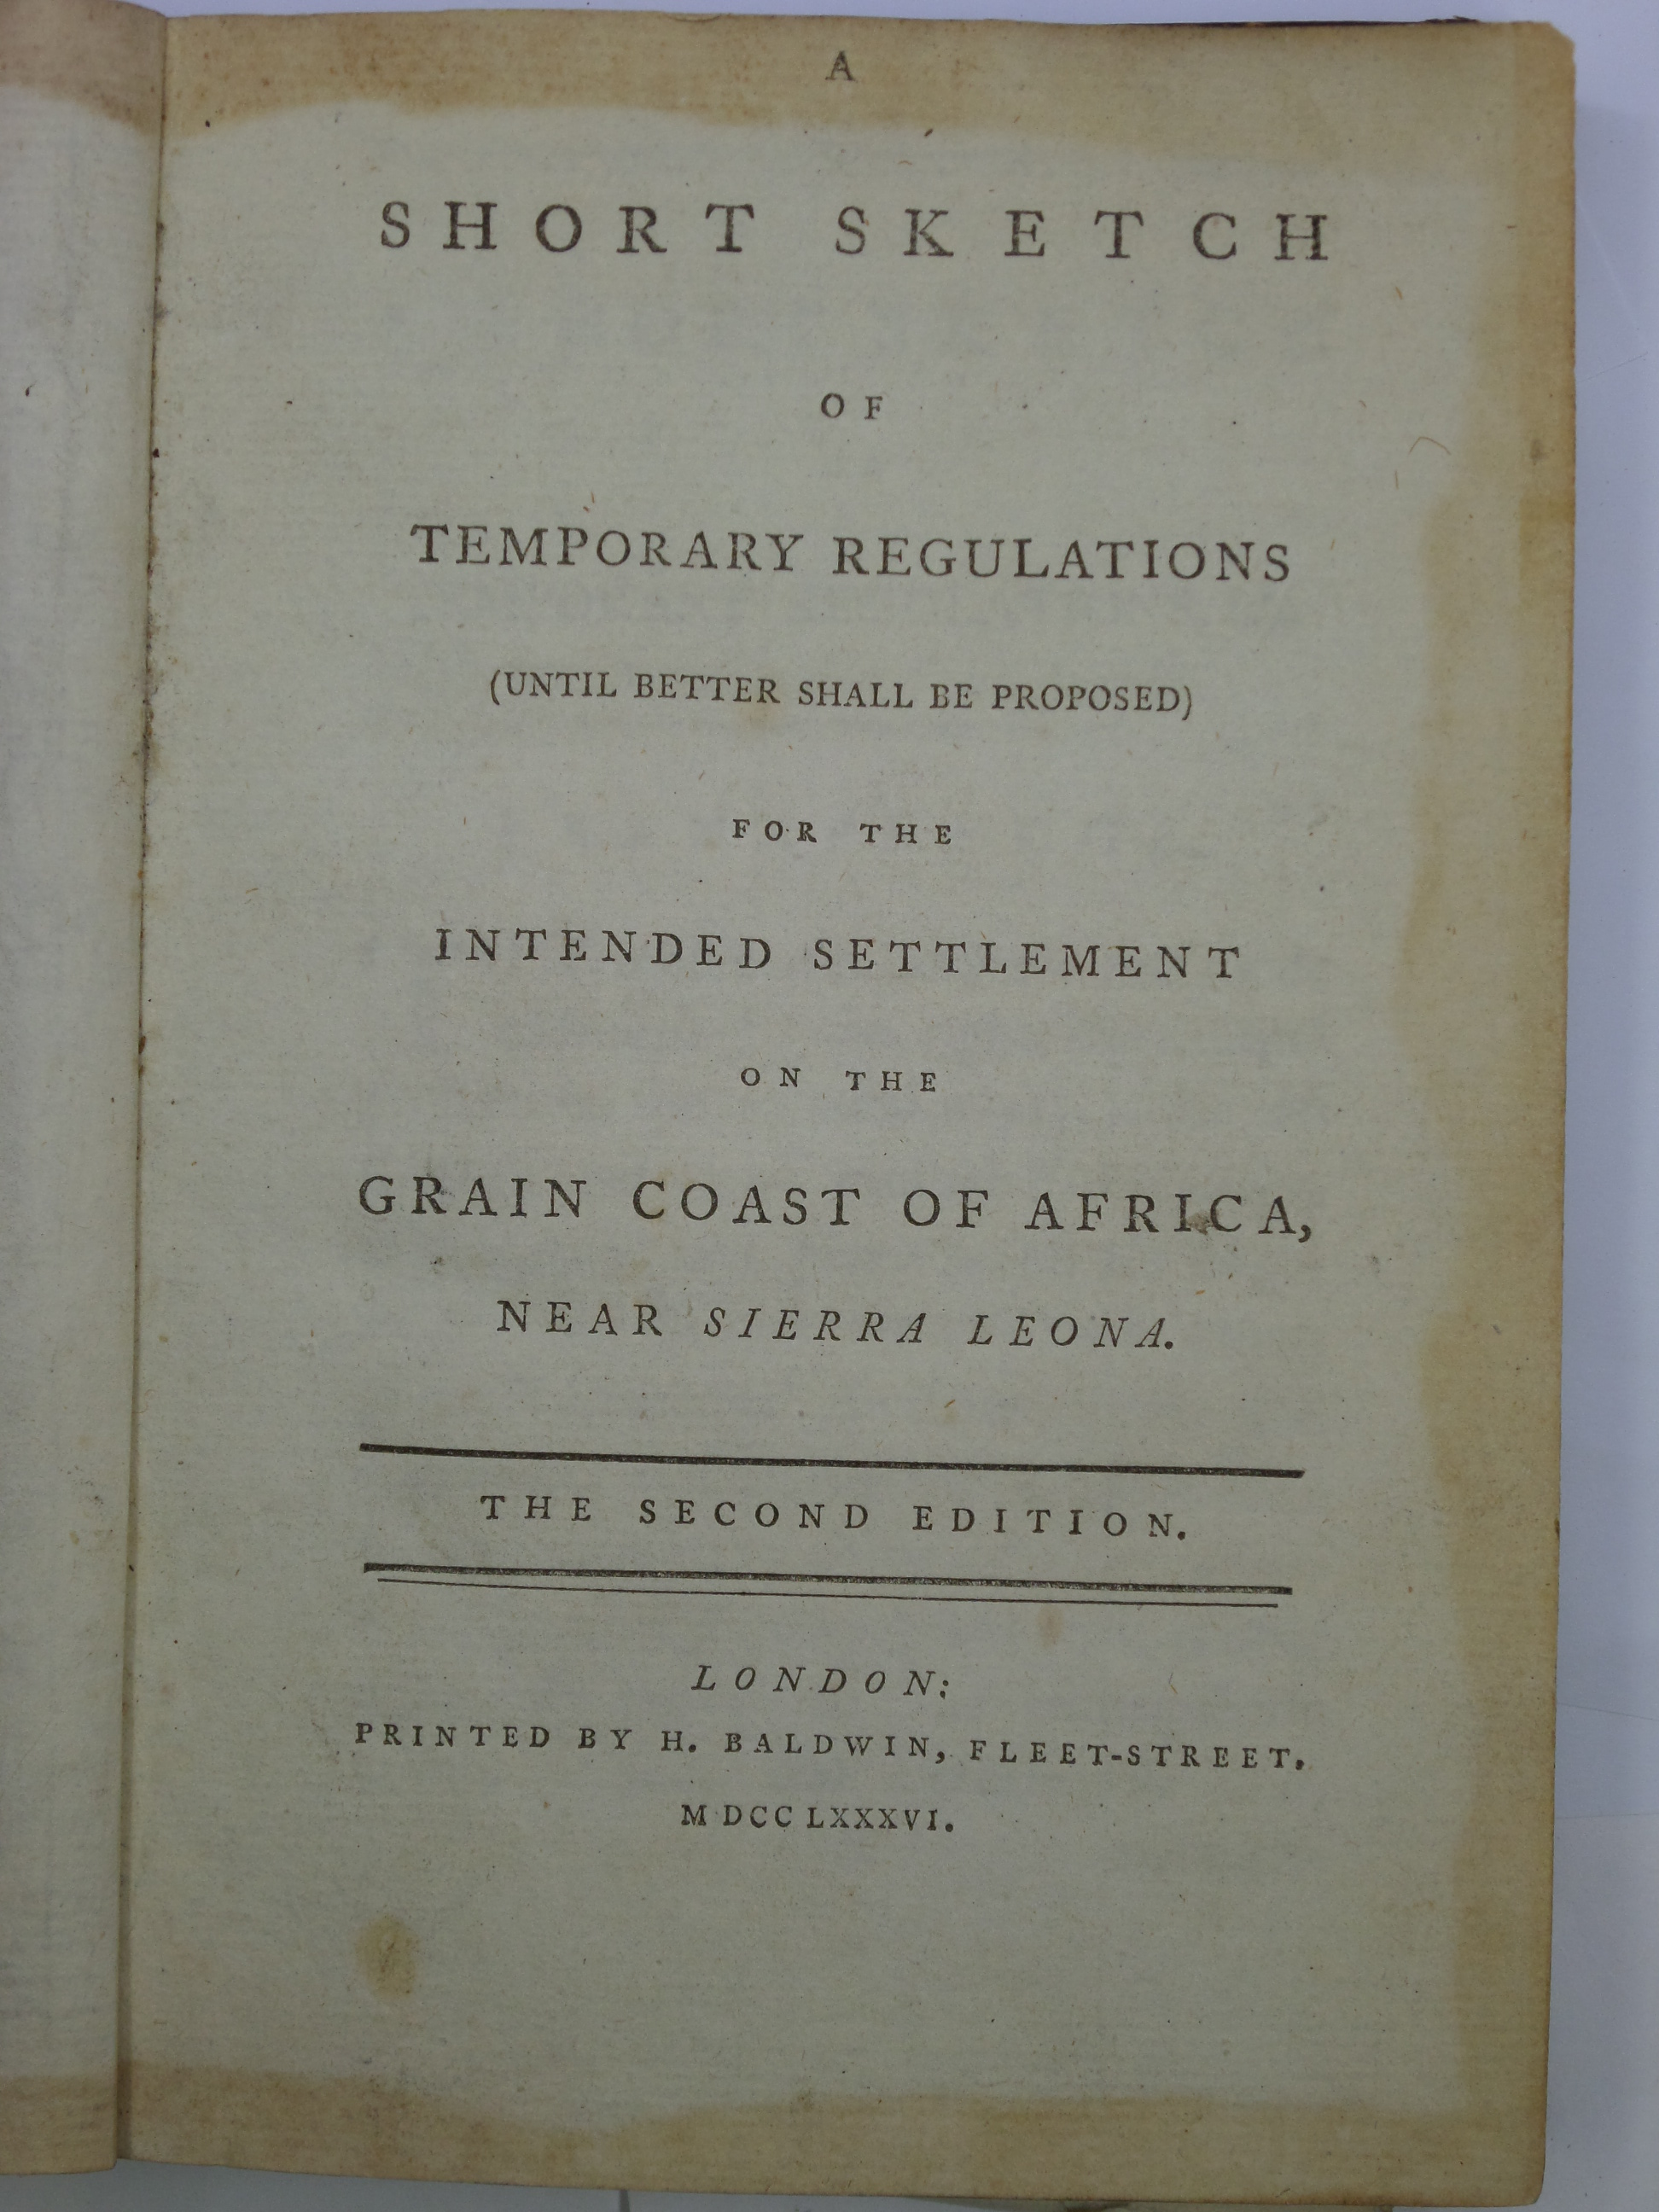 [ANTI-SLAVERY] GRANVILLE SHARP 1786 A SHORT SKETCH OF TEMPORARY REGULATIONS FOR THE INTENDED SETTLEMENT ON THE GRAIN COAST OF AFRICA, NEAR SIERRA LEONA [EVANGELICAL ABOLITIONIST; COLONIAL SLAVE SETTLEMENT]